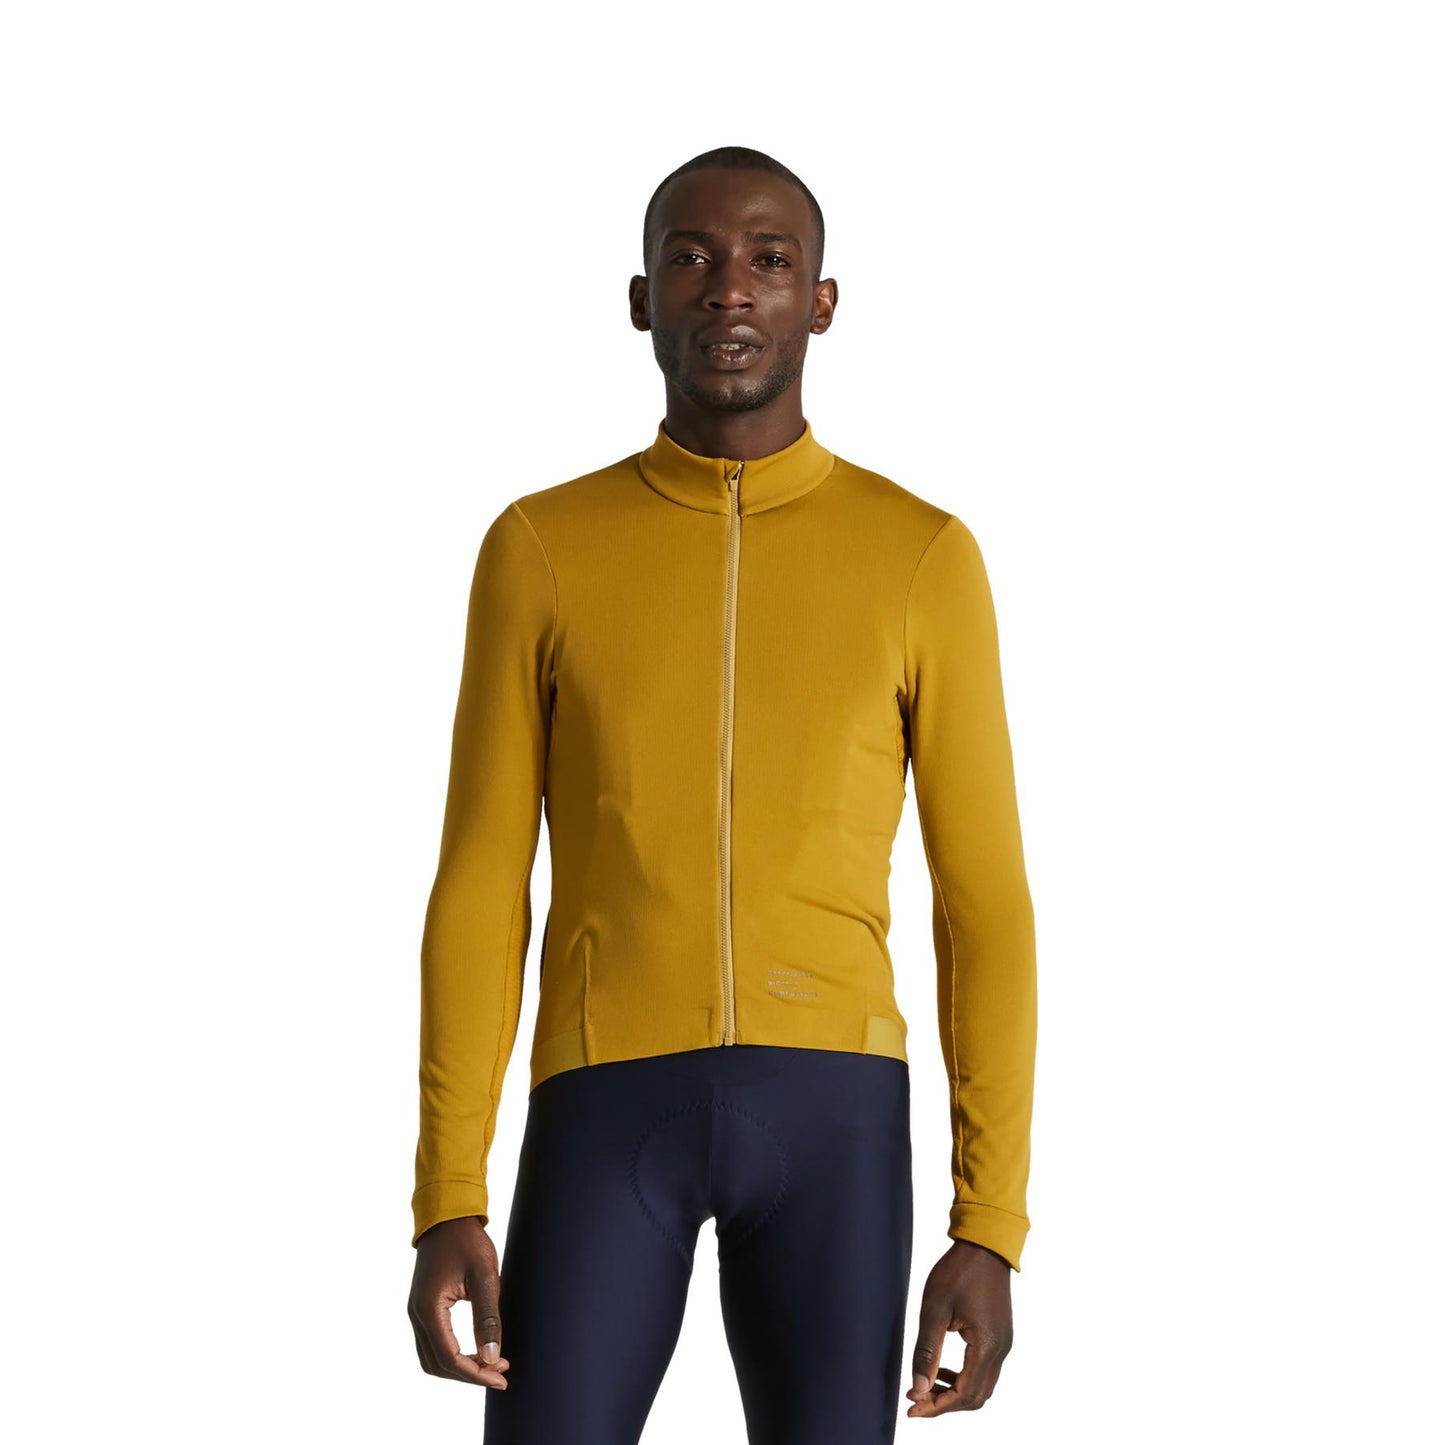 Mens Prime Power Grid Long Sleeve Jersey in Harvest Gold